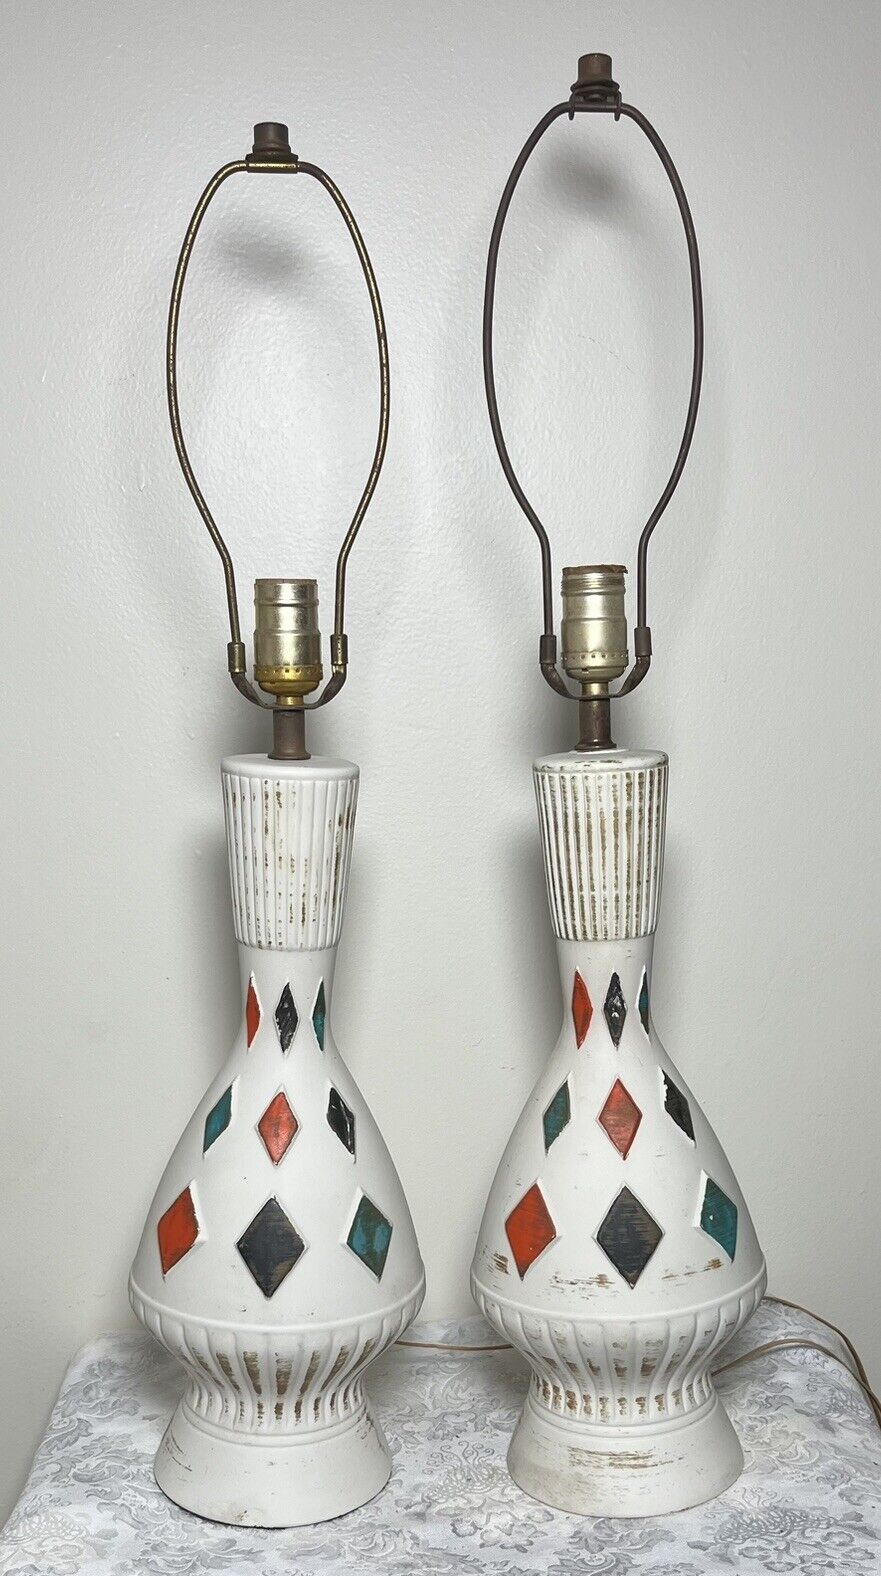 Vtg PAIR MCM Table Lamps Atomic Red Blue Green Diamonds Rare Find Retro Works